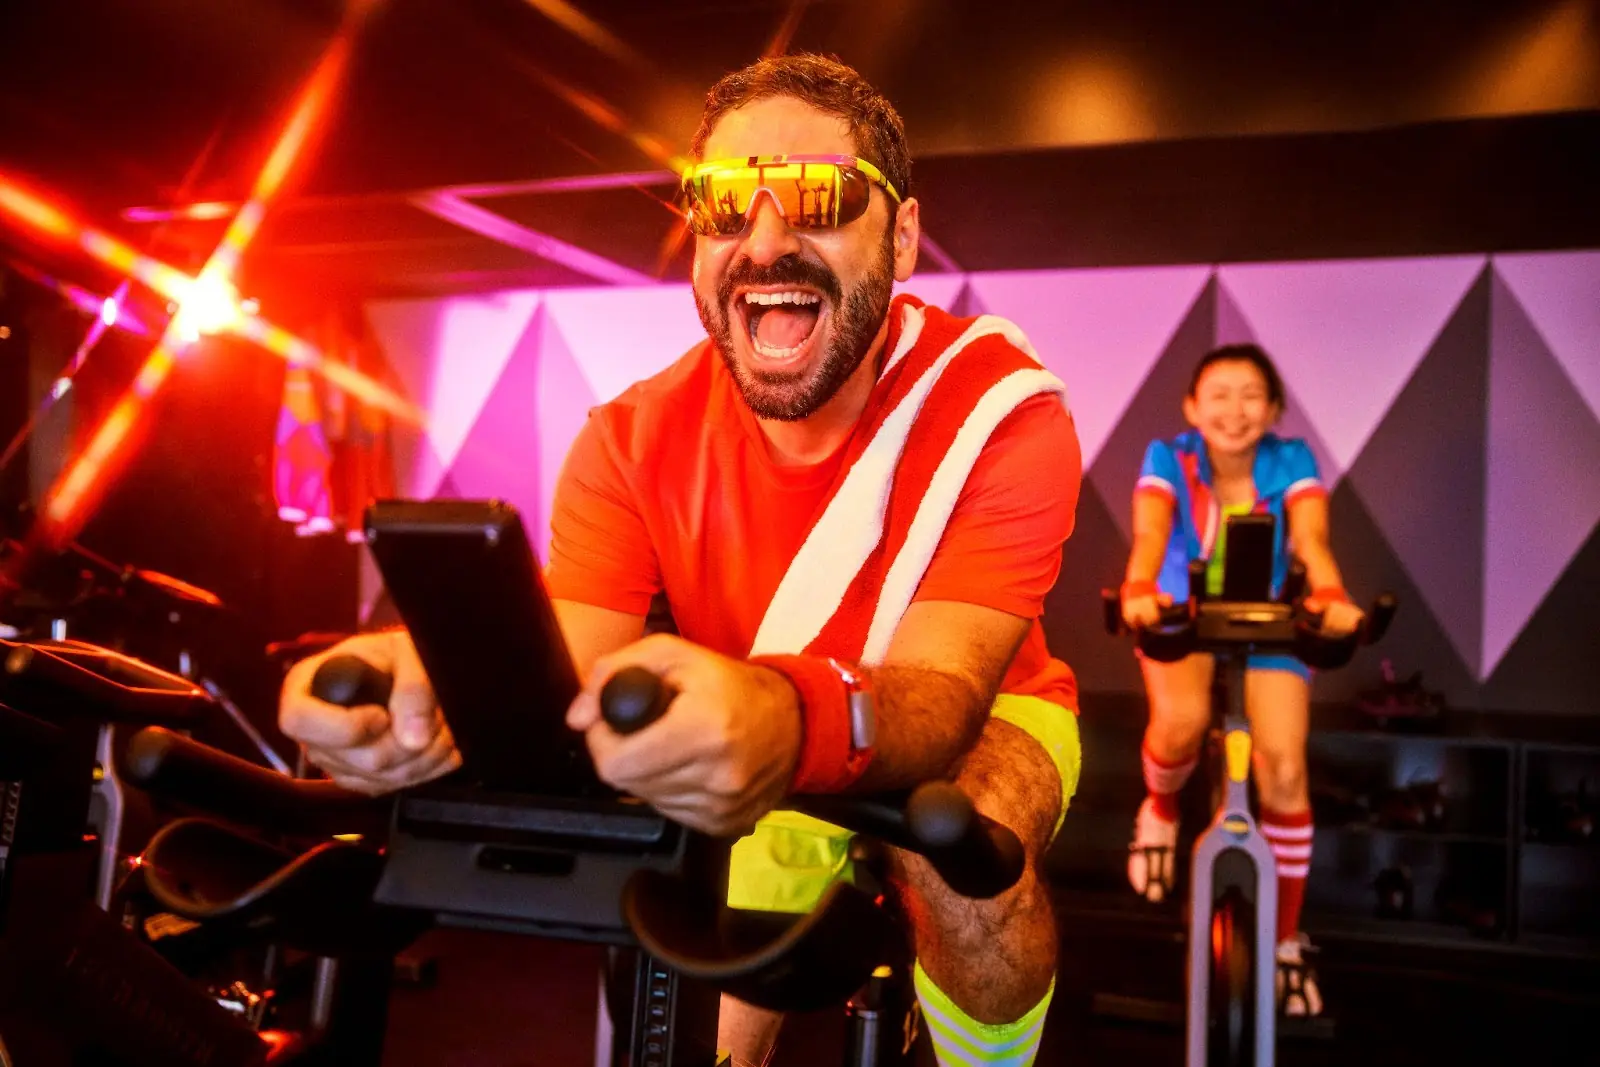 Exercise class onboard Virgin Voyages